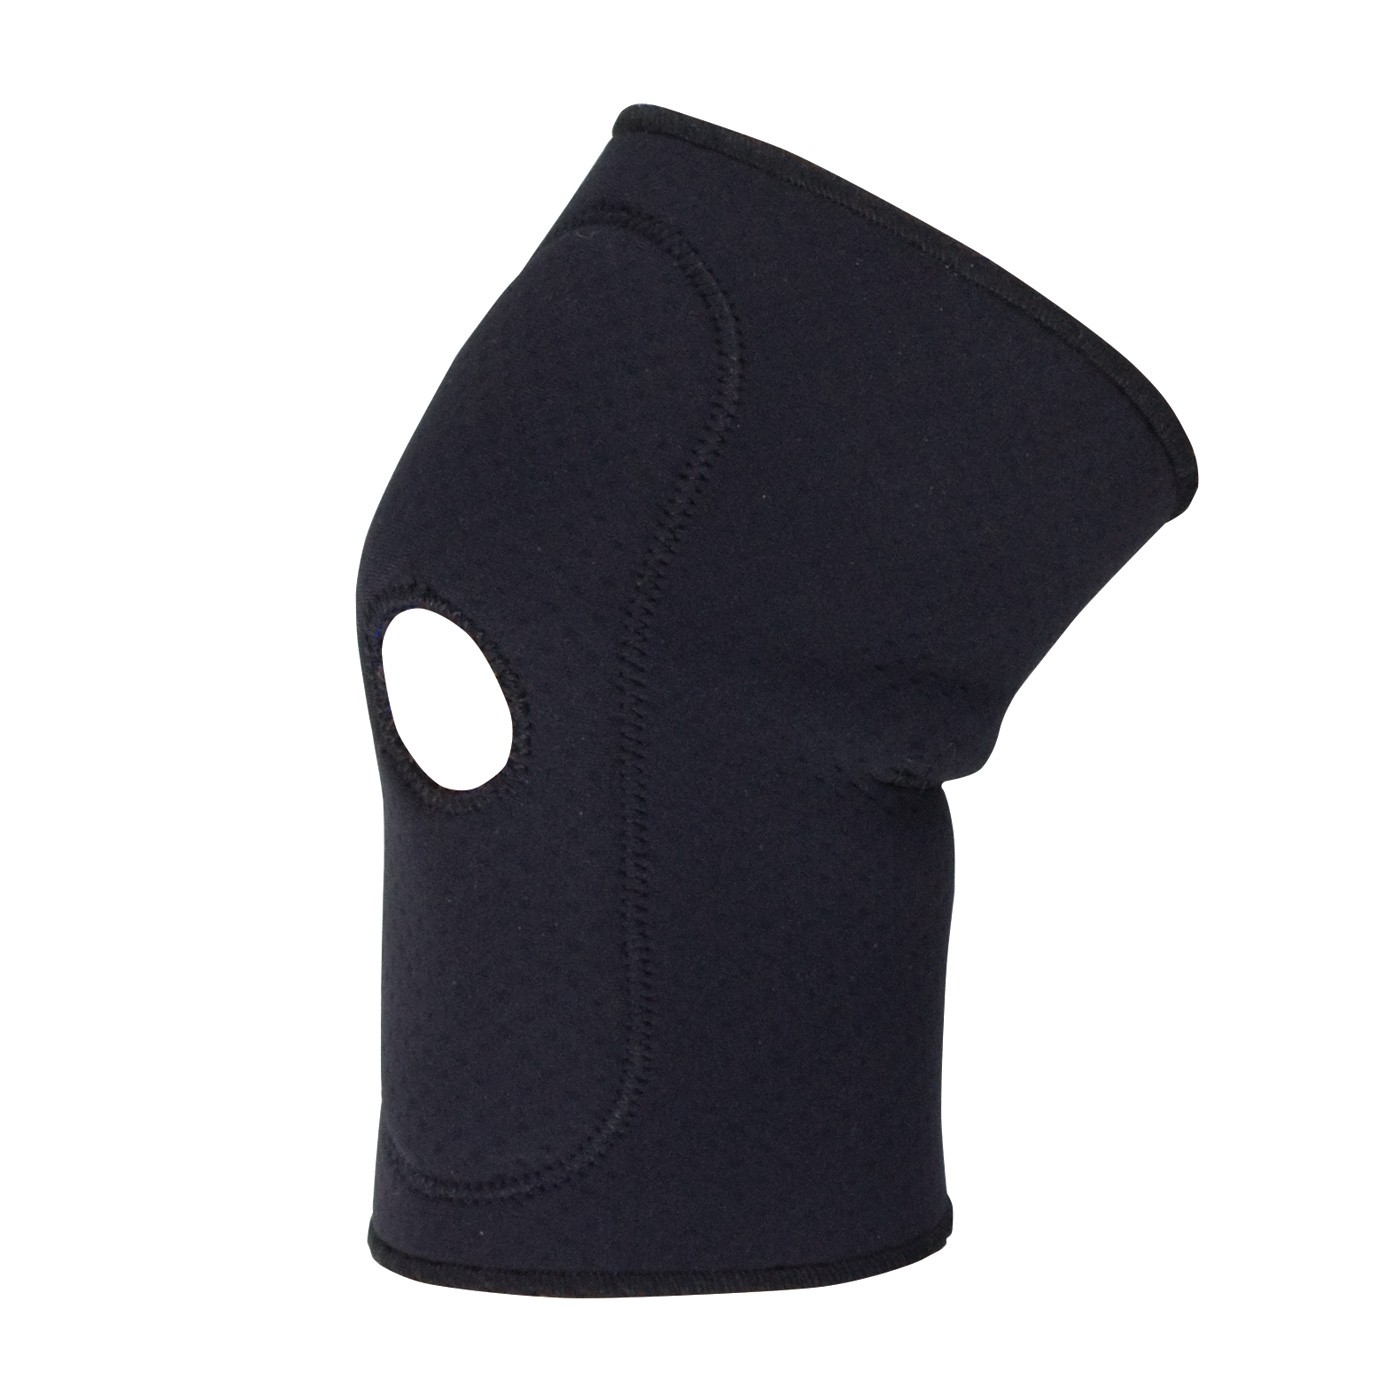 Elbow Sleeve, X-Large 17-18", Terry Lined Neoprene w/ Nylon Outer Shell